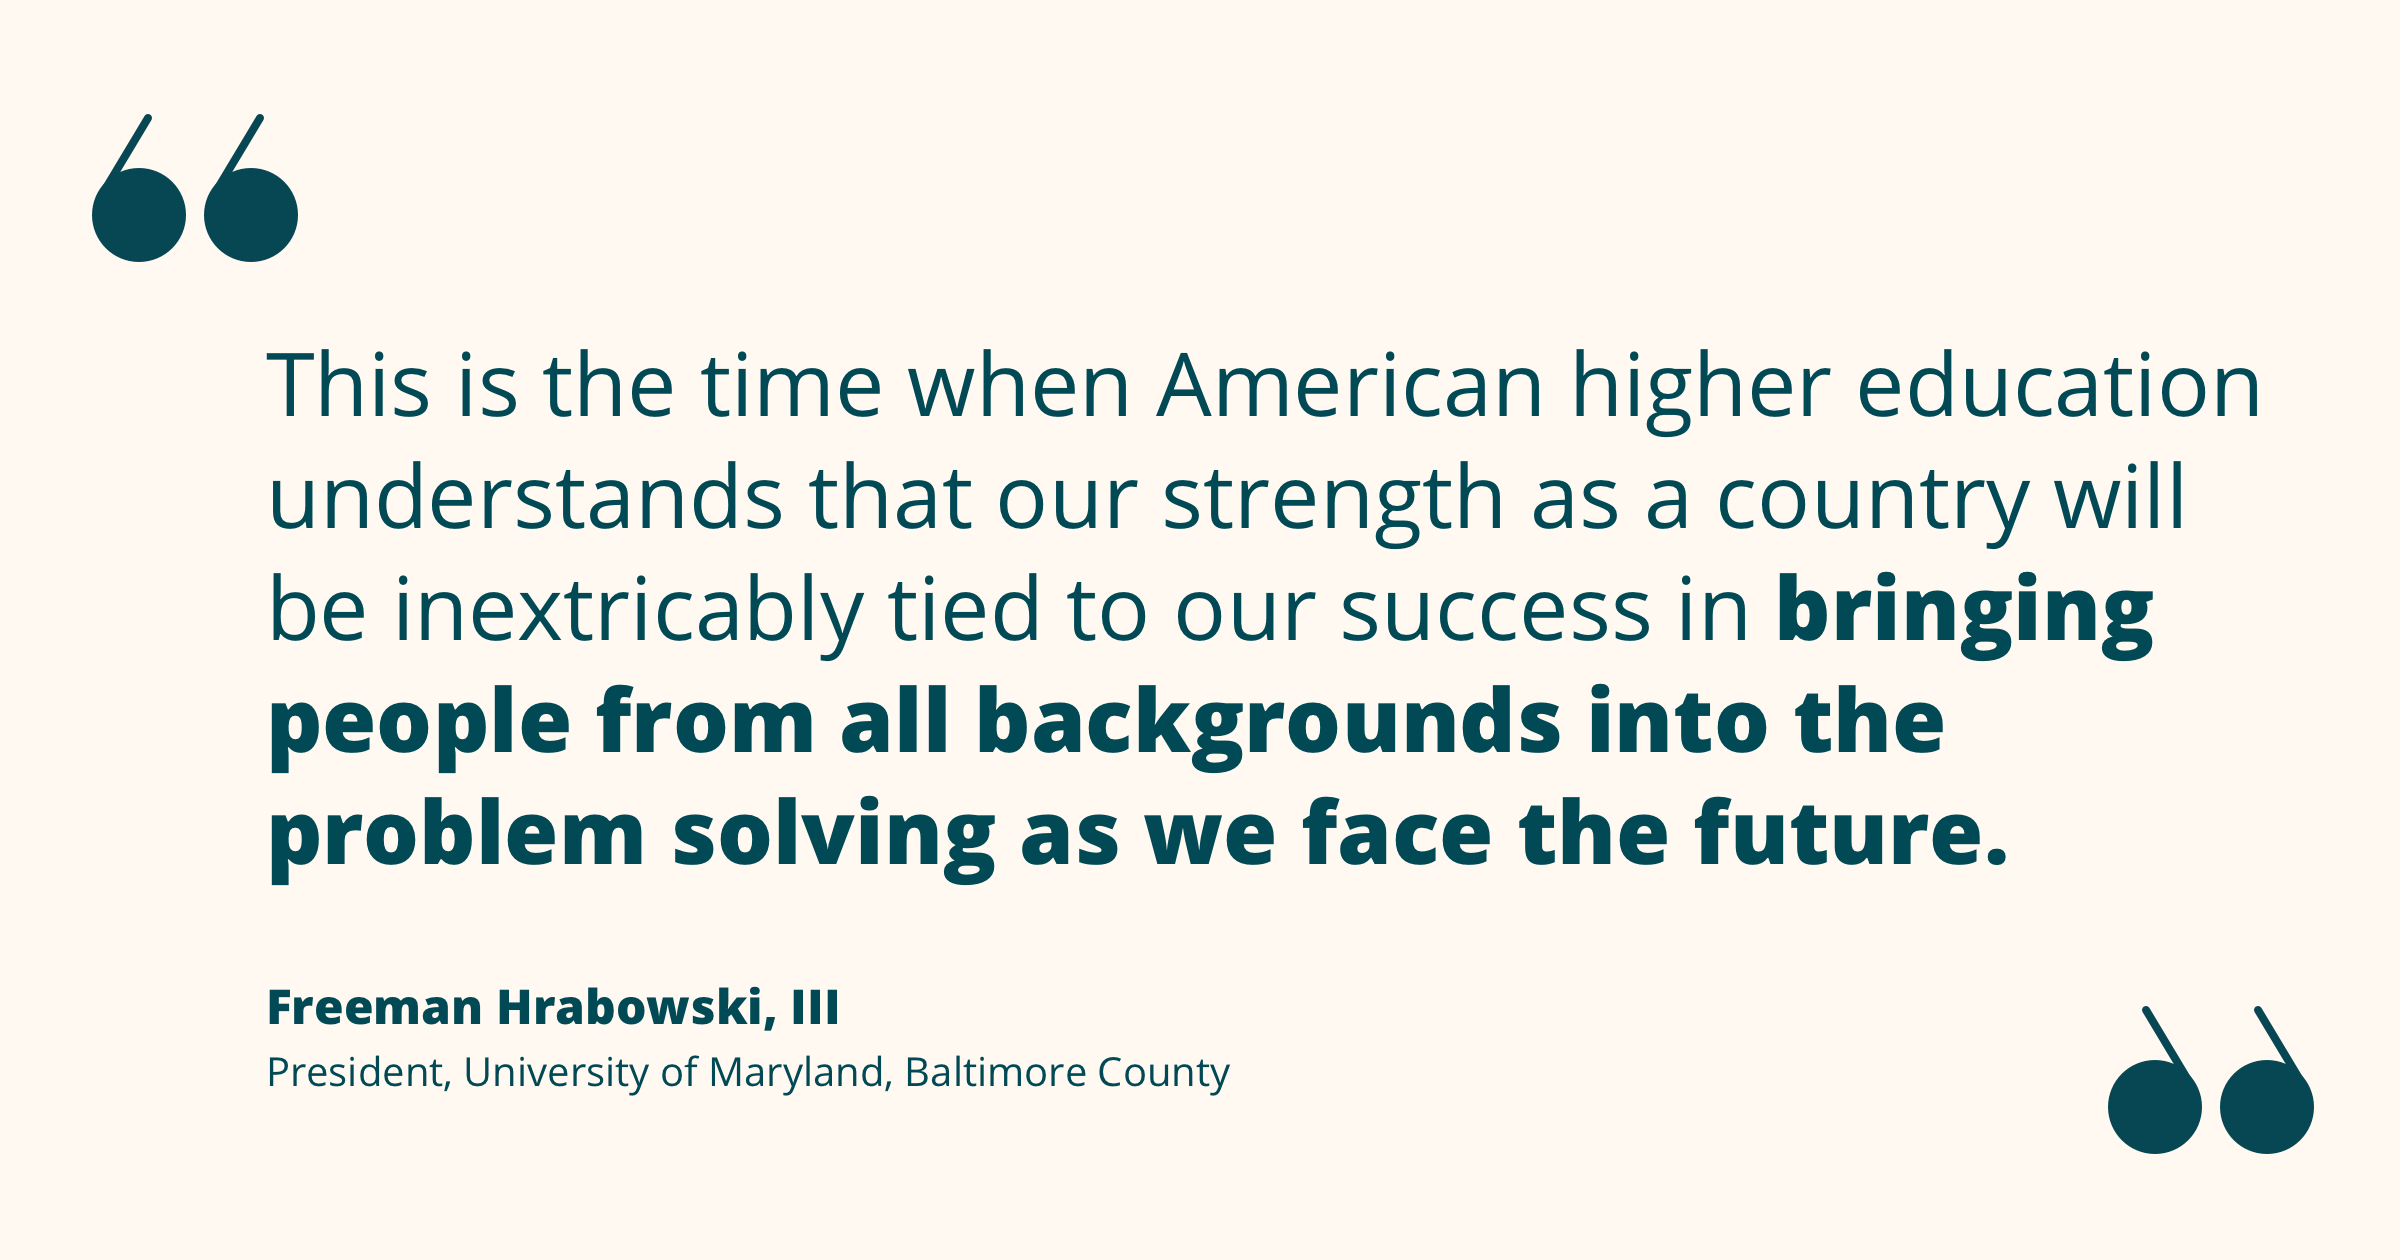 Quote by Freeman Hrabowski re: problem solving in higher ed with people from all backgrounds to face the future.